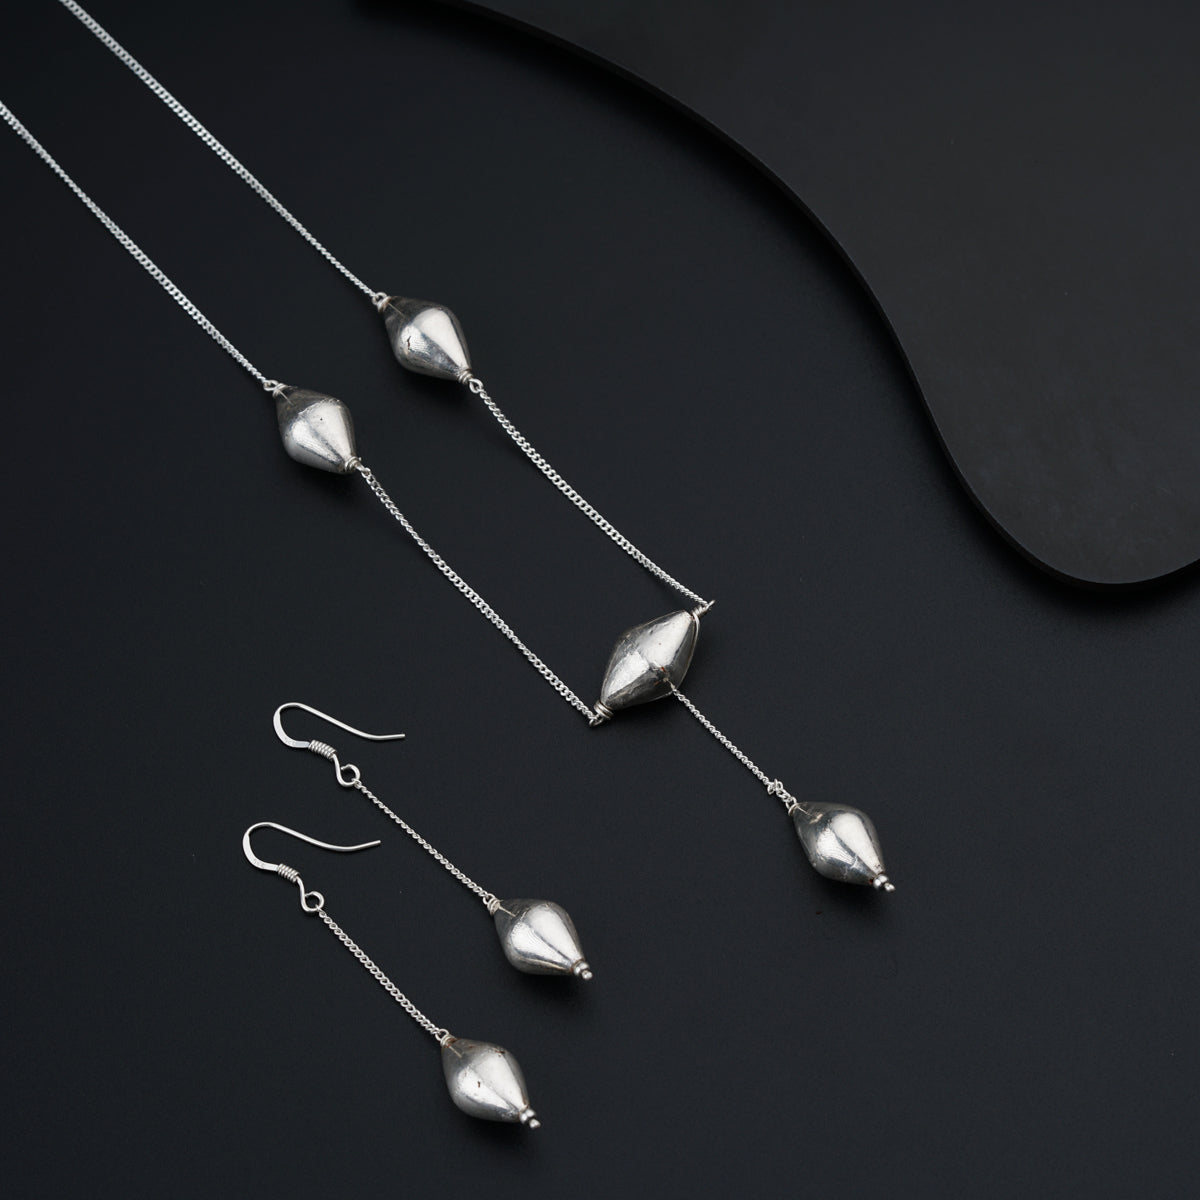 a set of silver jewelry on a black surface